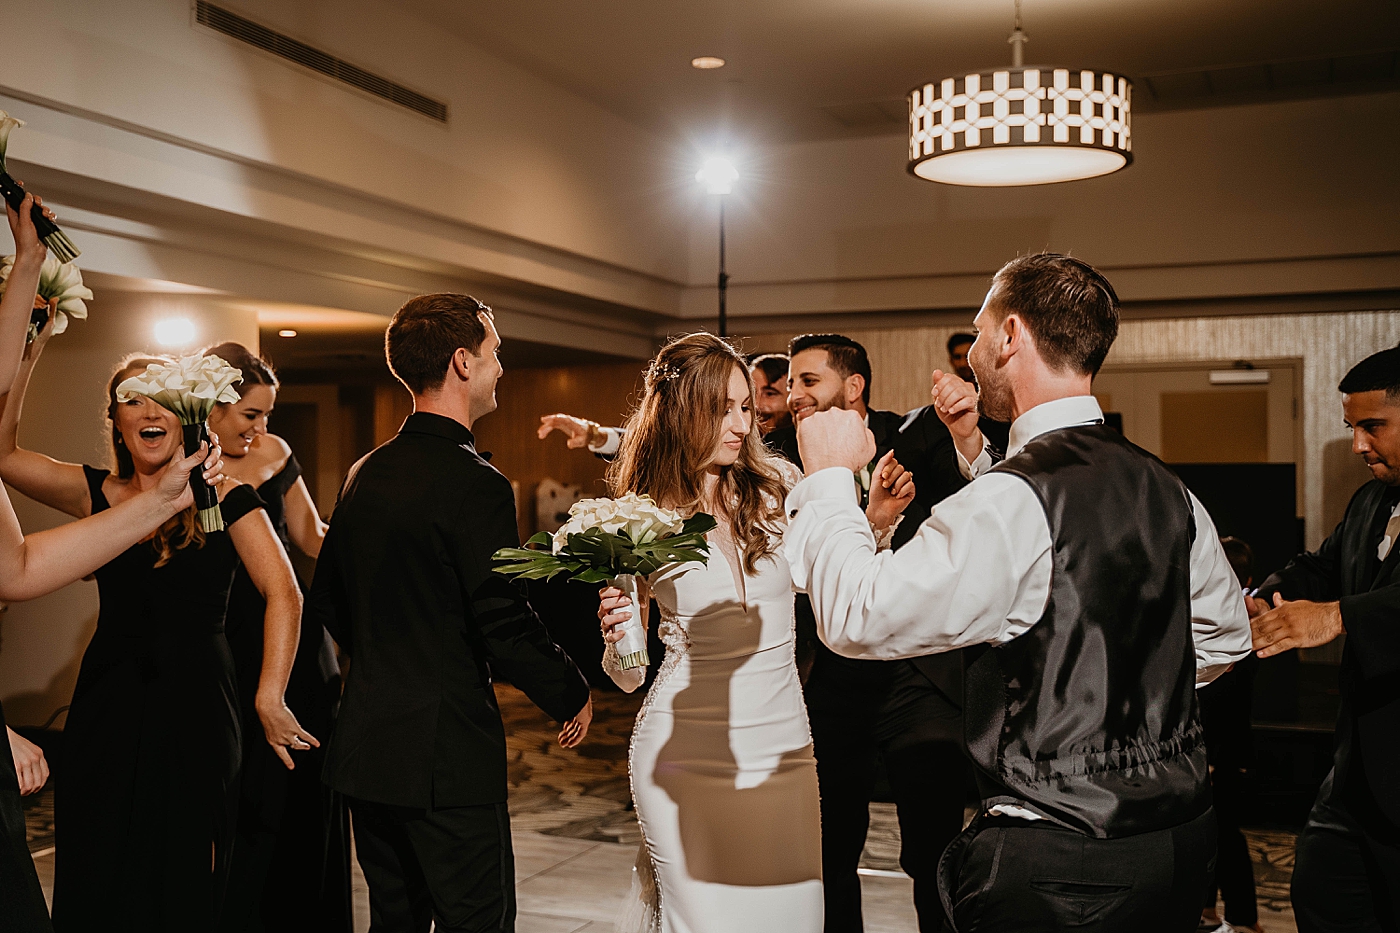 Candid shot of dancing at the reception Waterstone Resort and Marina Wedding captured by South Florida Wedding Photographer Krystal Capone Photography